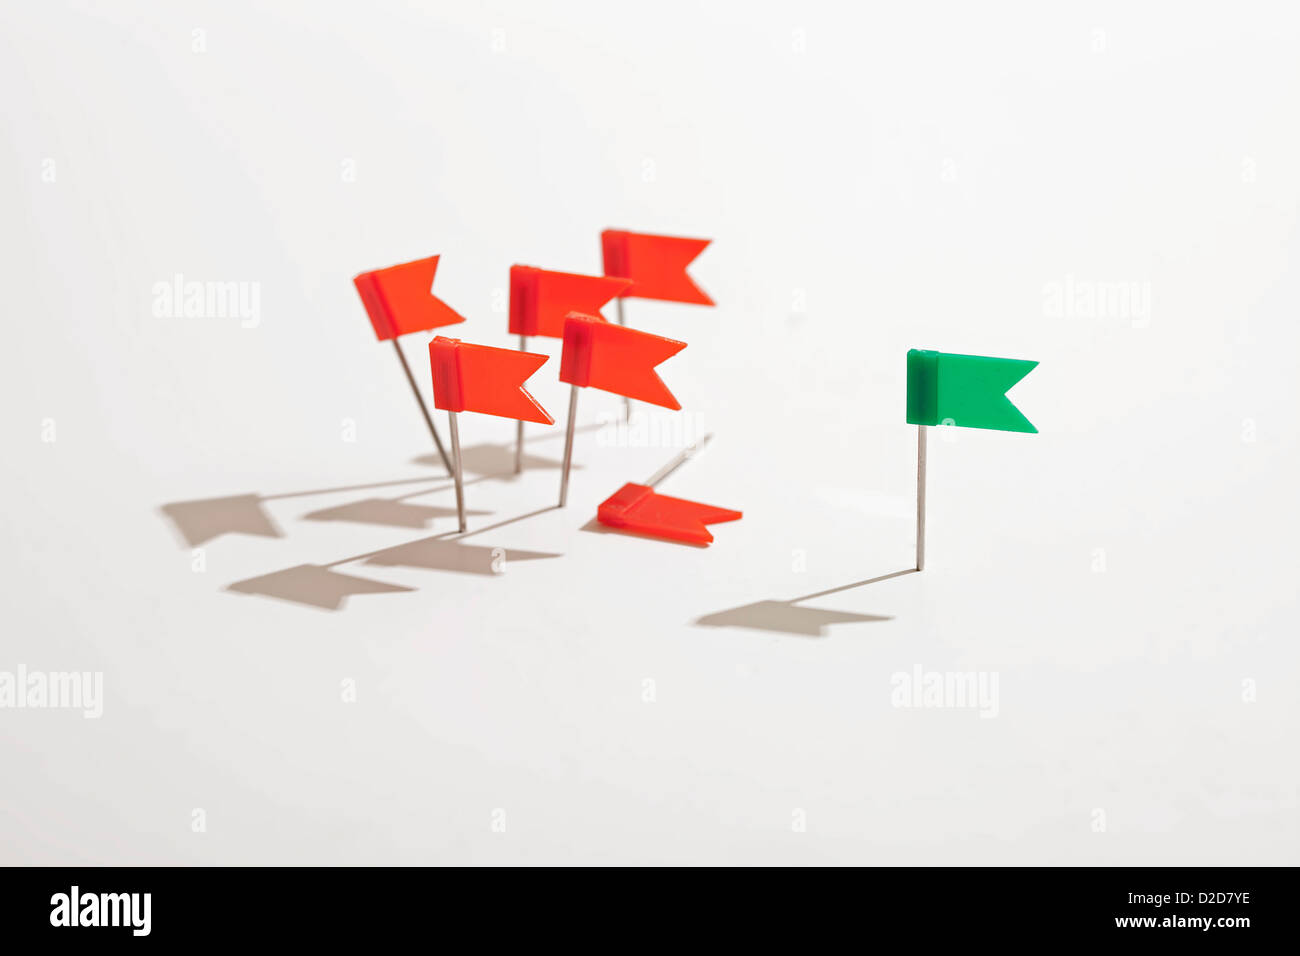 Green flag standing apart from red flags Stock Photo